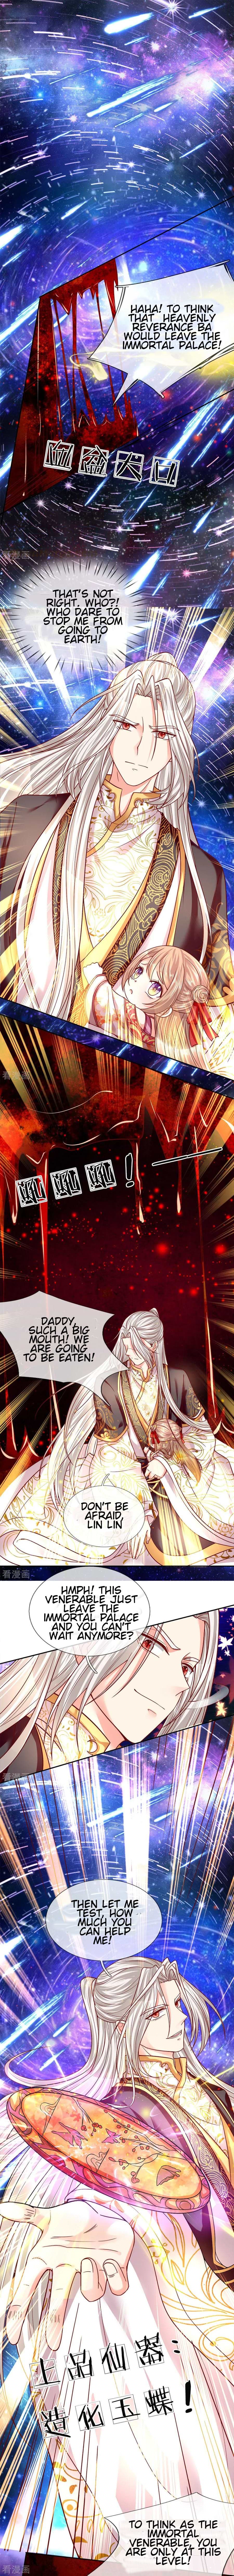 Immortal Reverence Dad Ch. 1 Chapter 1